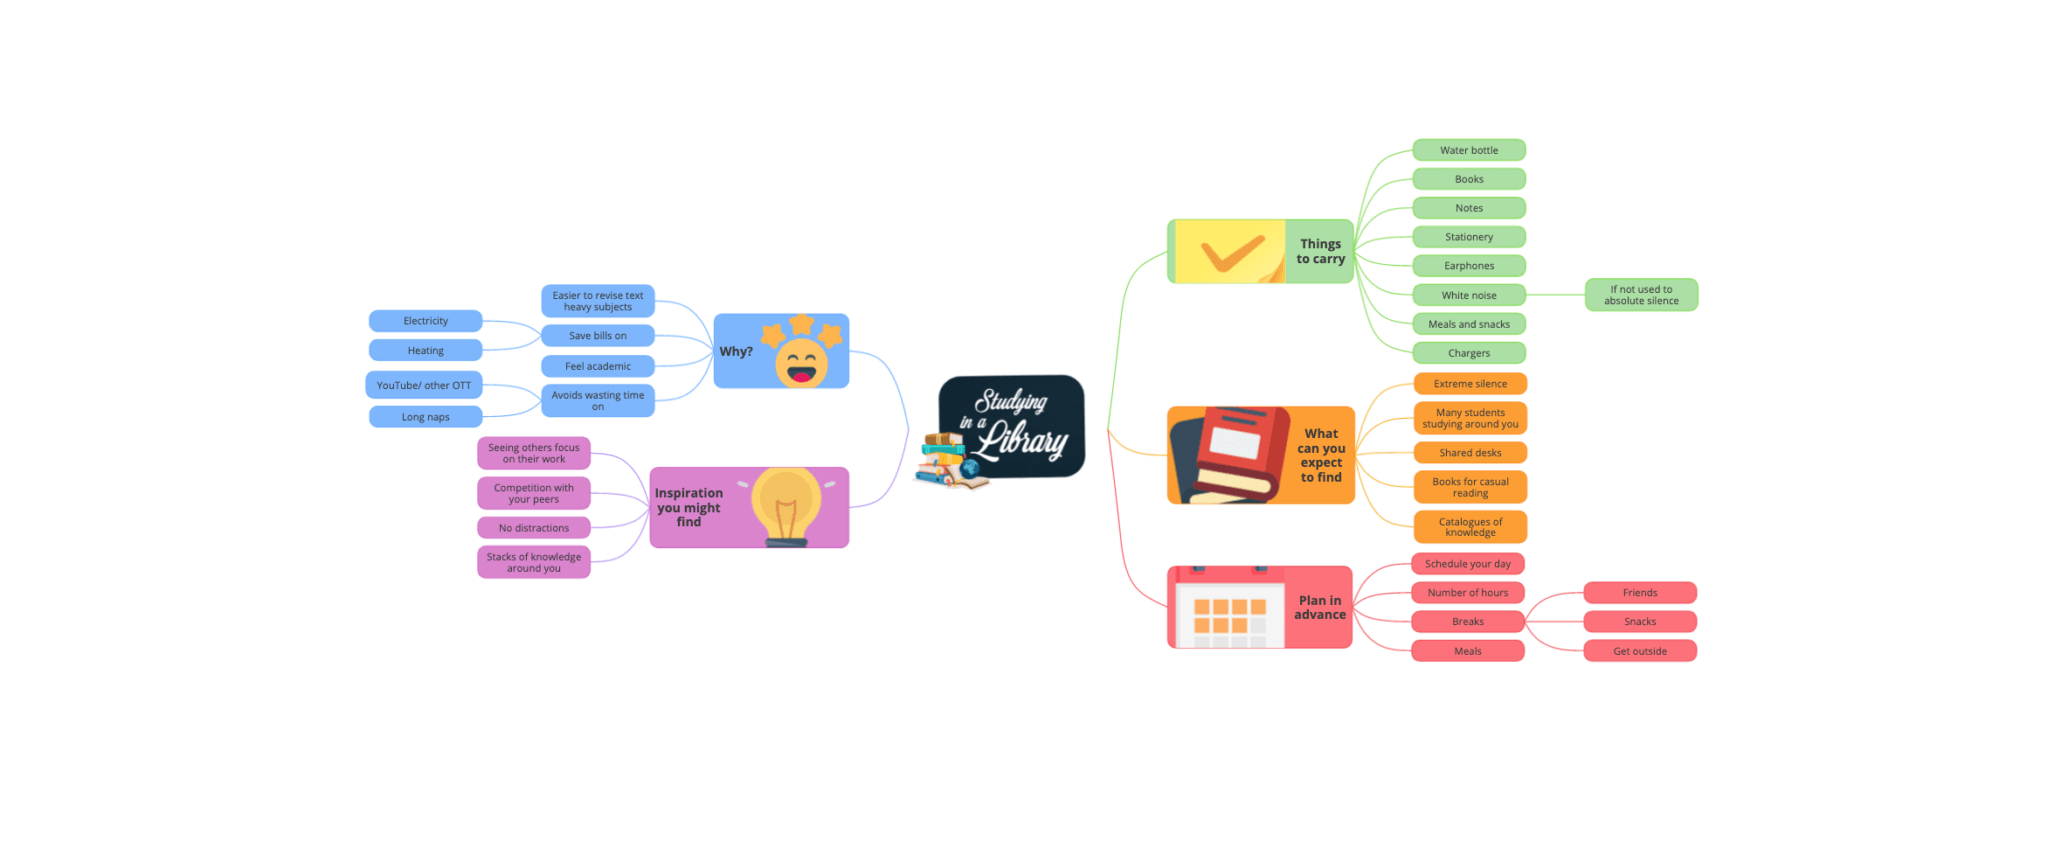 Education example mind map